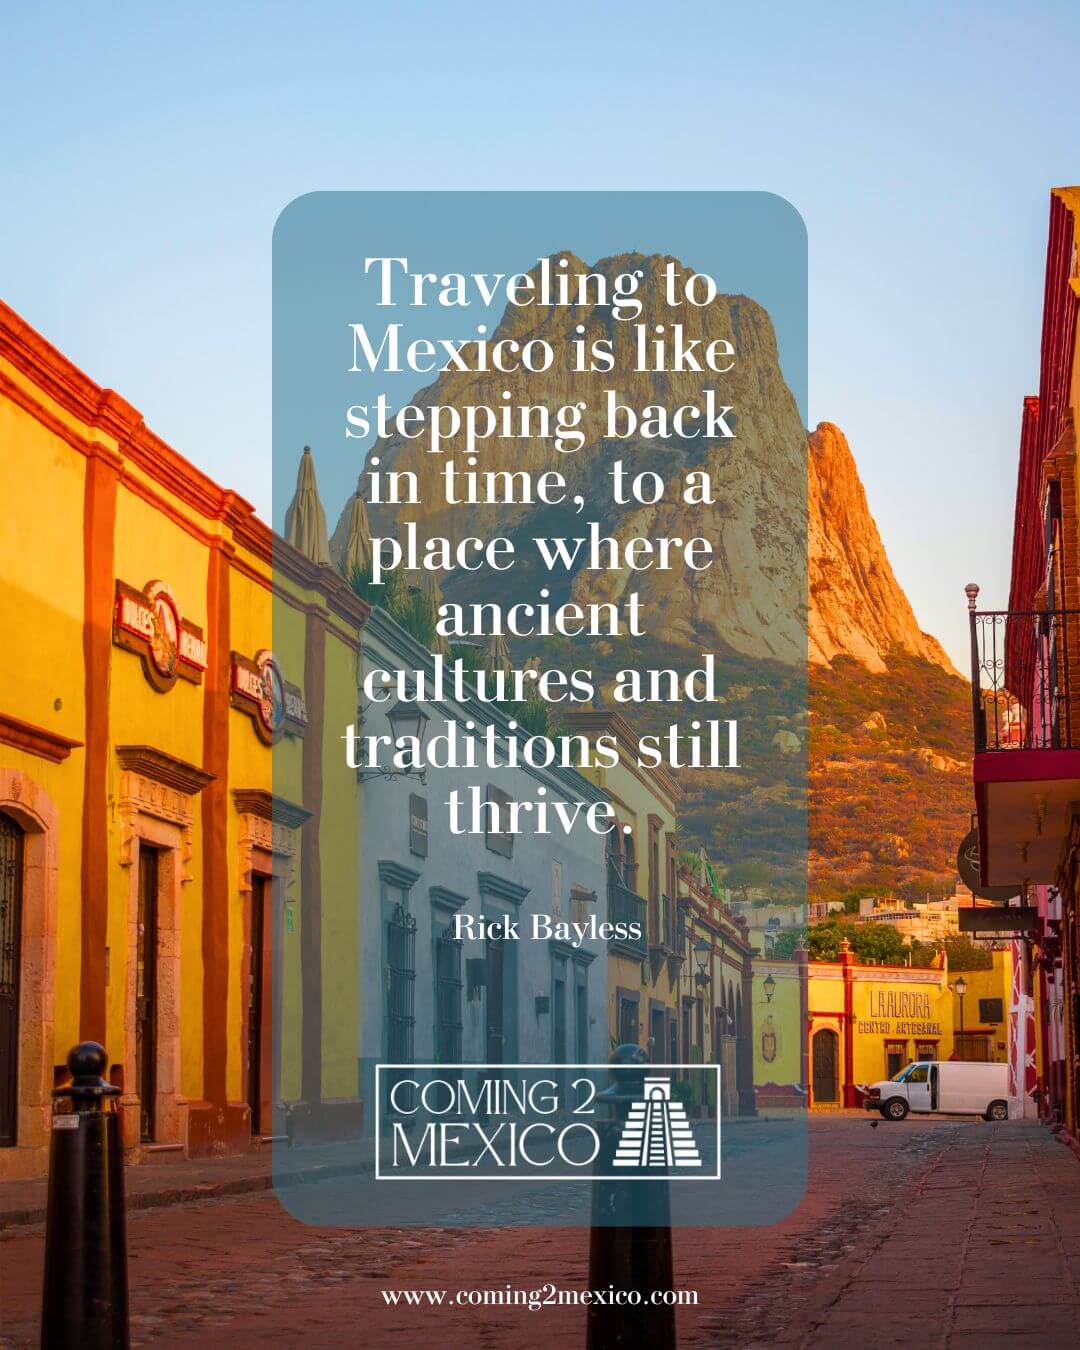 “Traveling to Mexico is like stepping back in time, to a place where ancient cultures and traditions still thrive.” – Rick Bayless